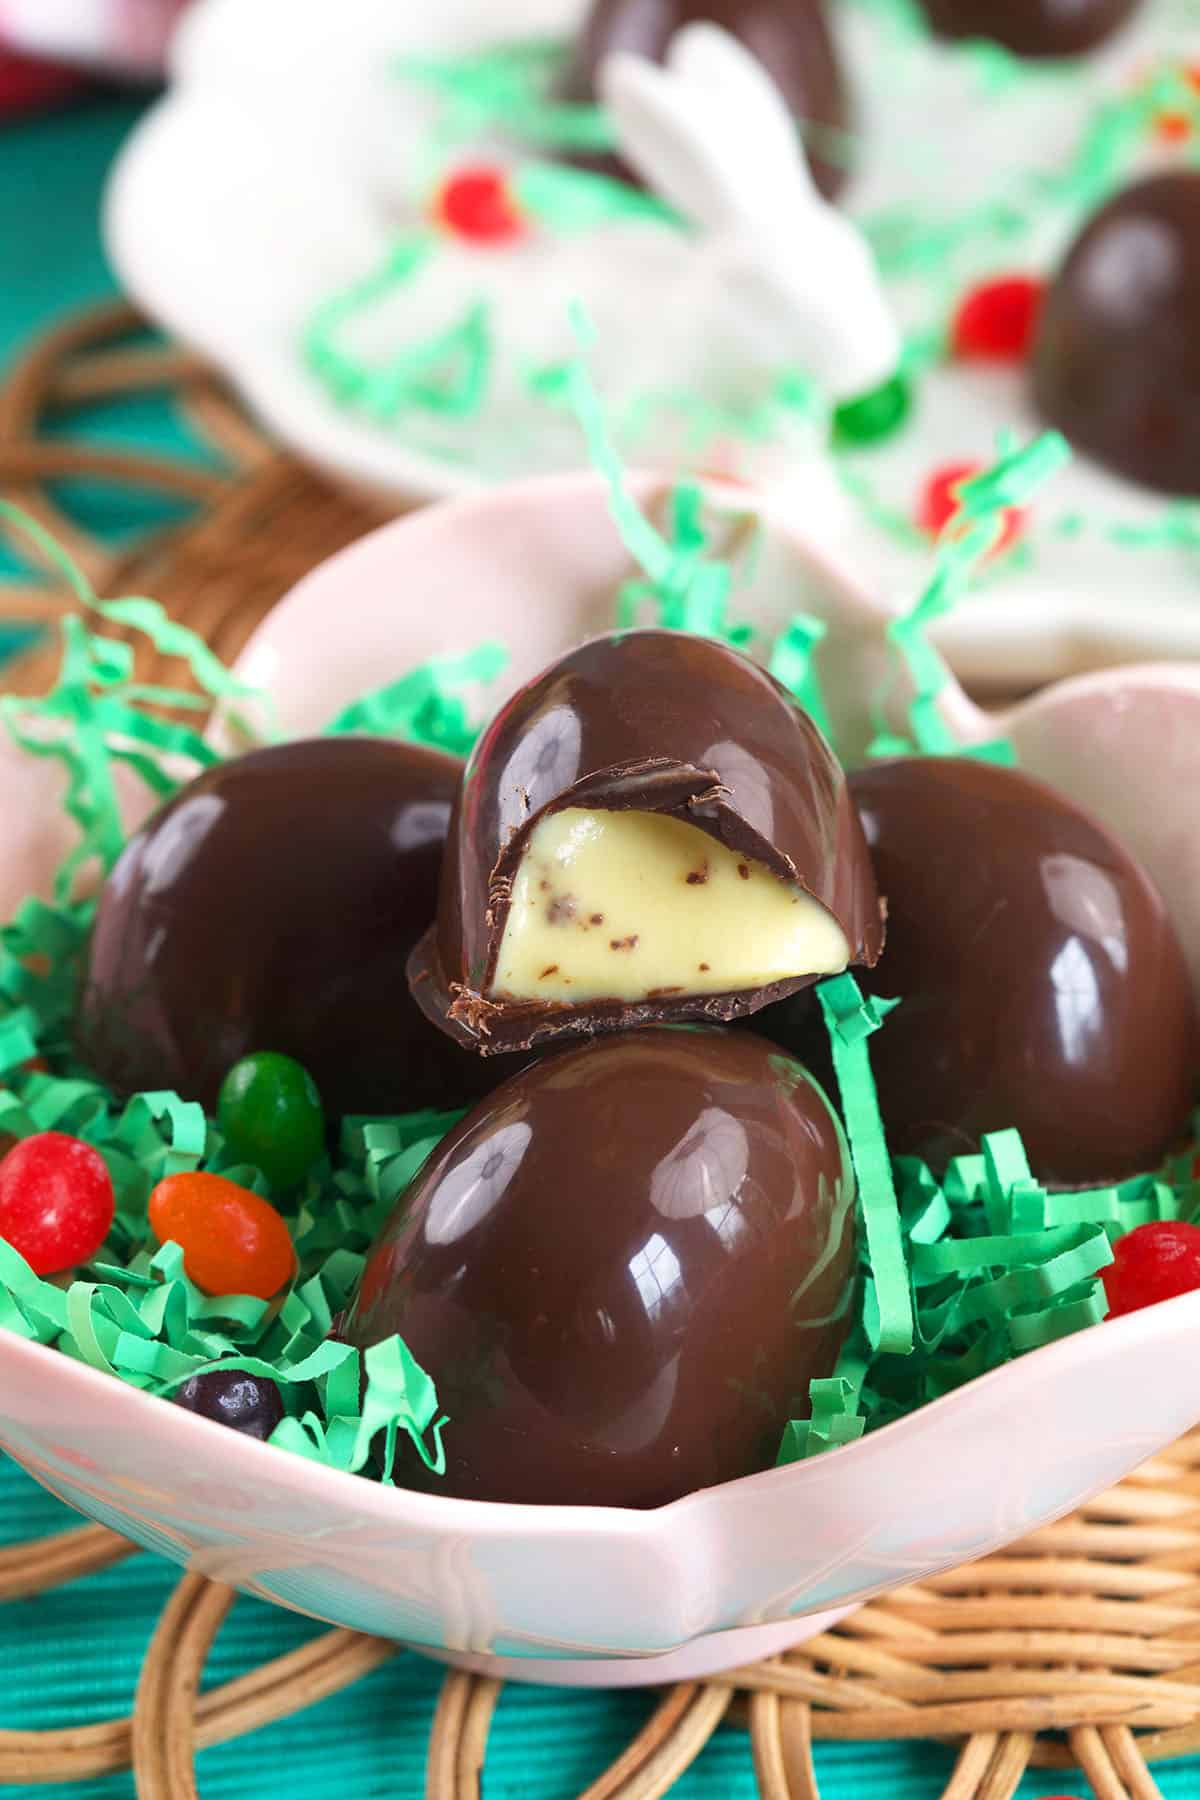 Chocolate Creme Brulee Eggs in a pink bowl with easter grass and jelly beans.